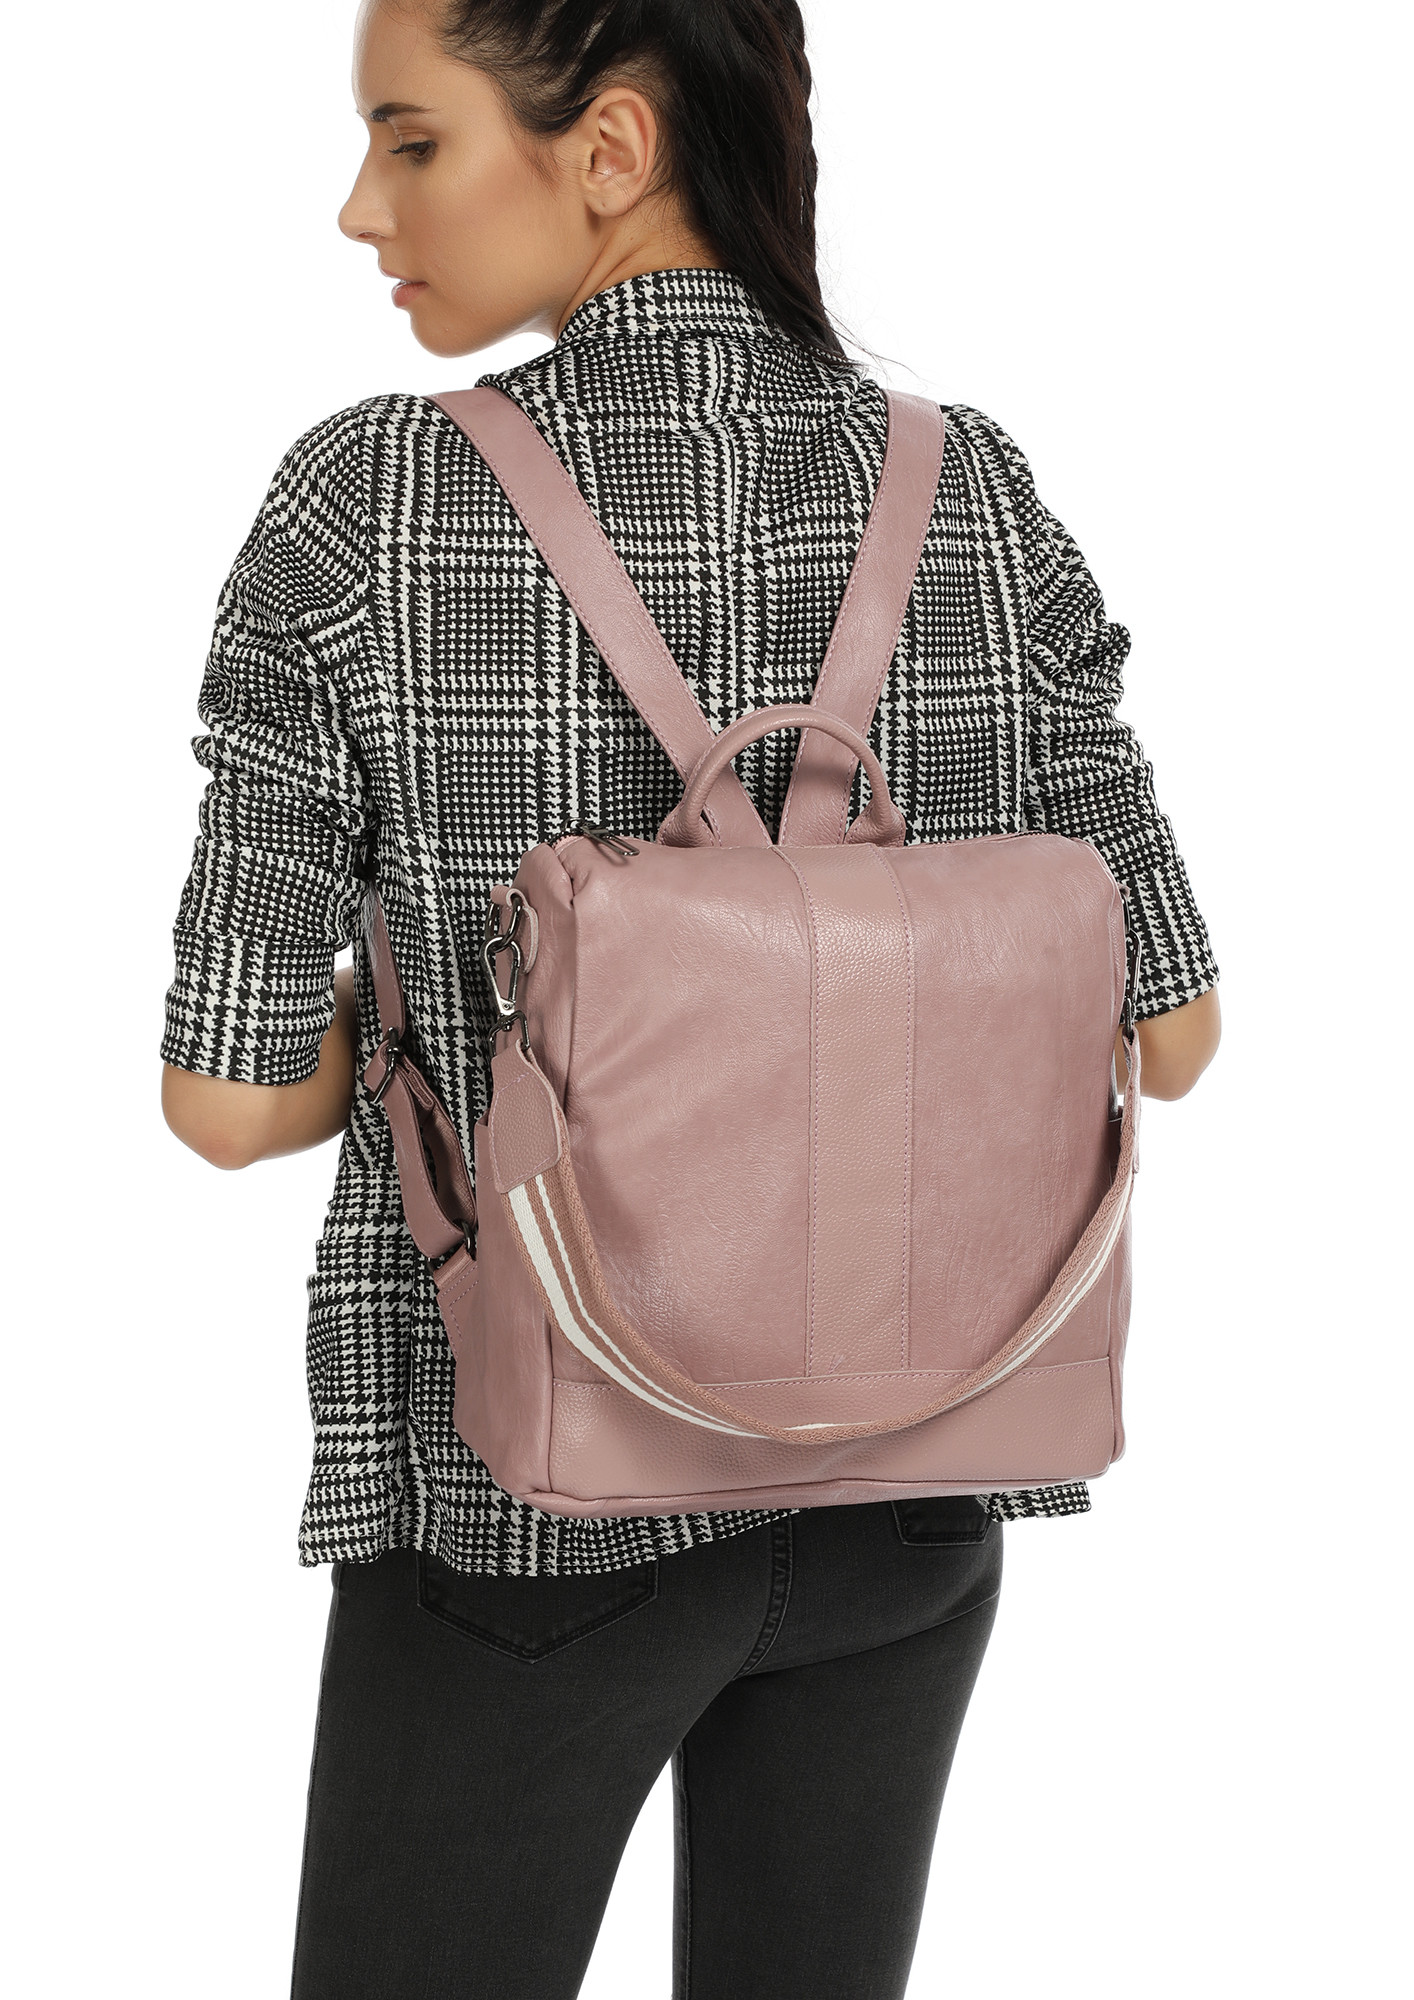 SEE YOU ON THE WEEKEND PINK BACKPACK